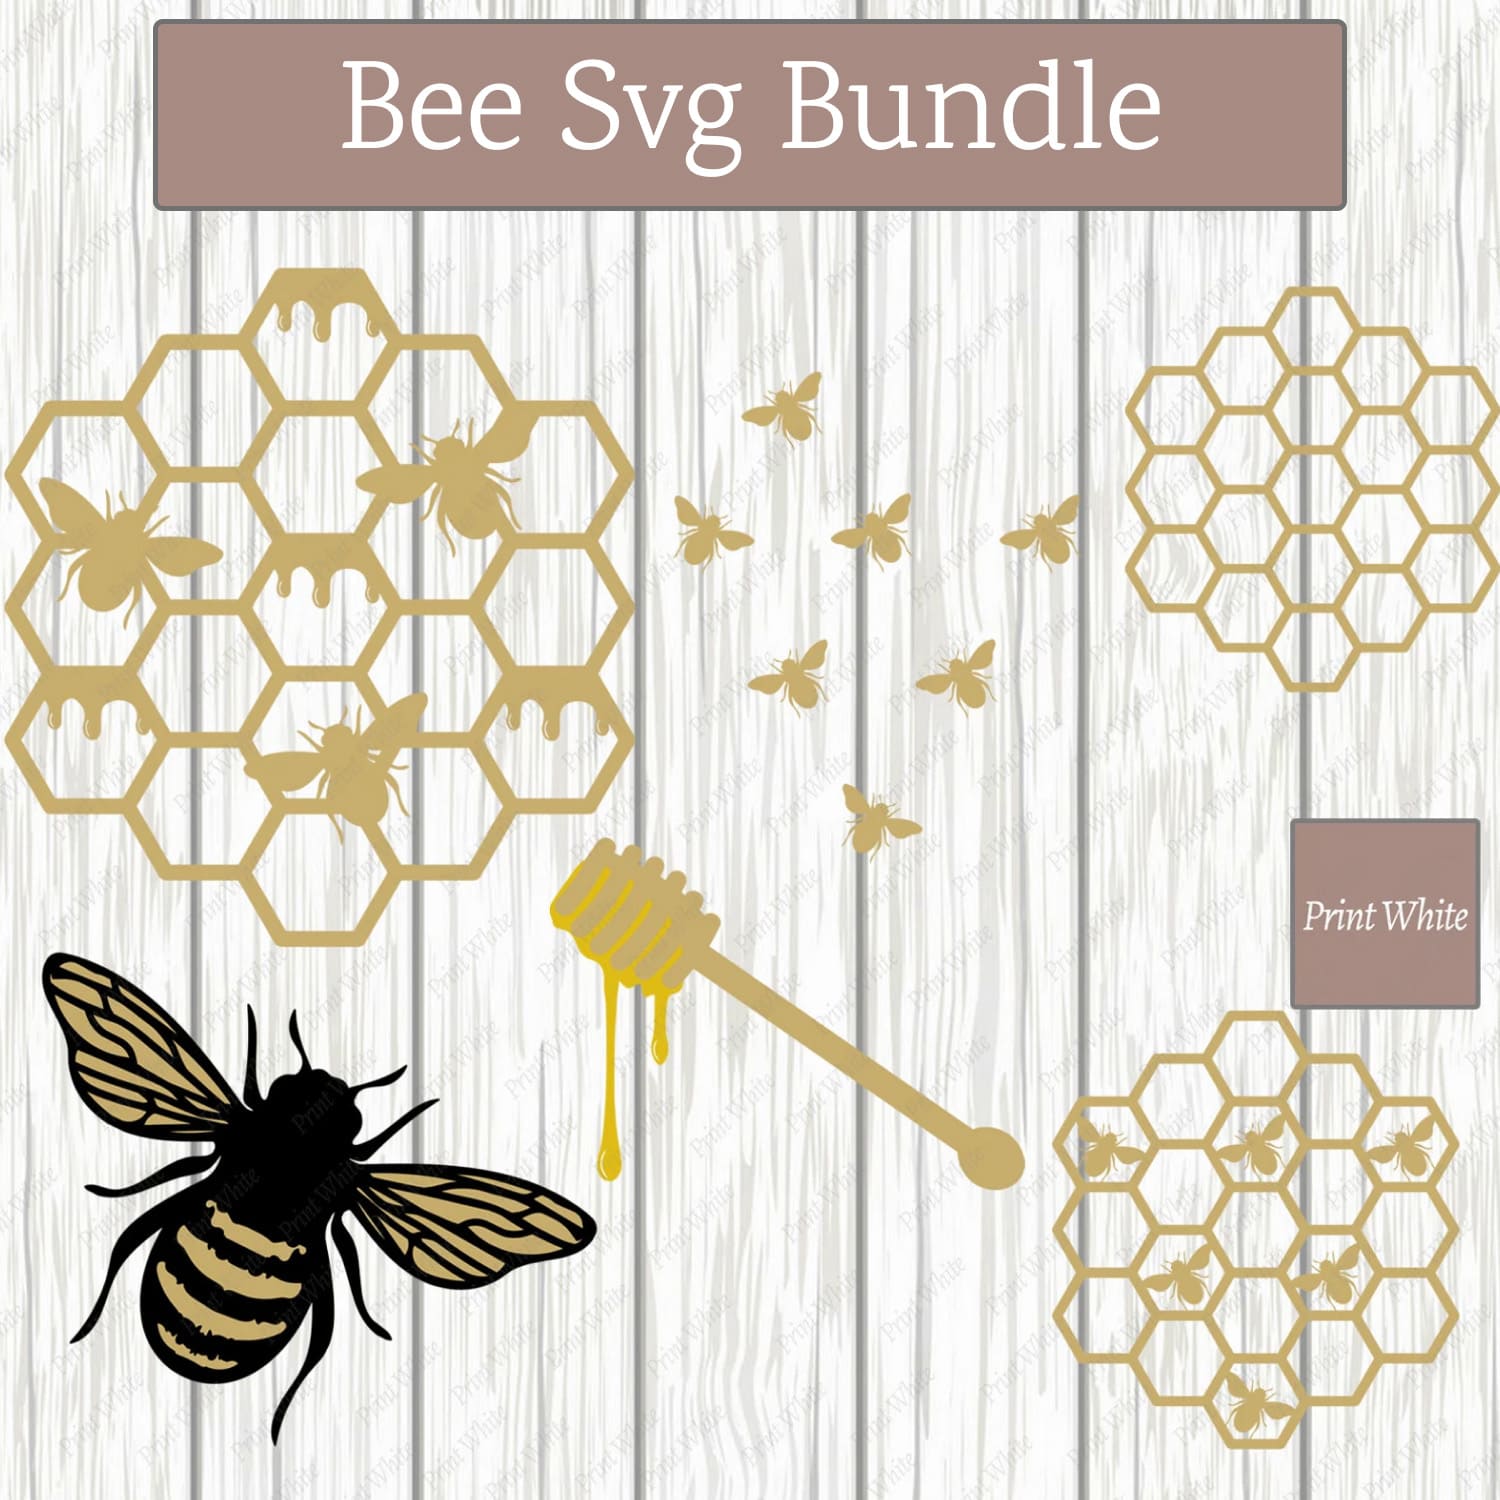 Bee svg bundle with honeycombs and bees.